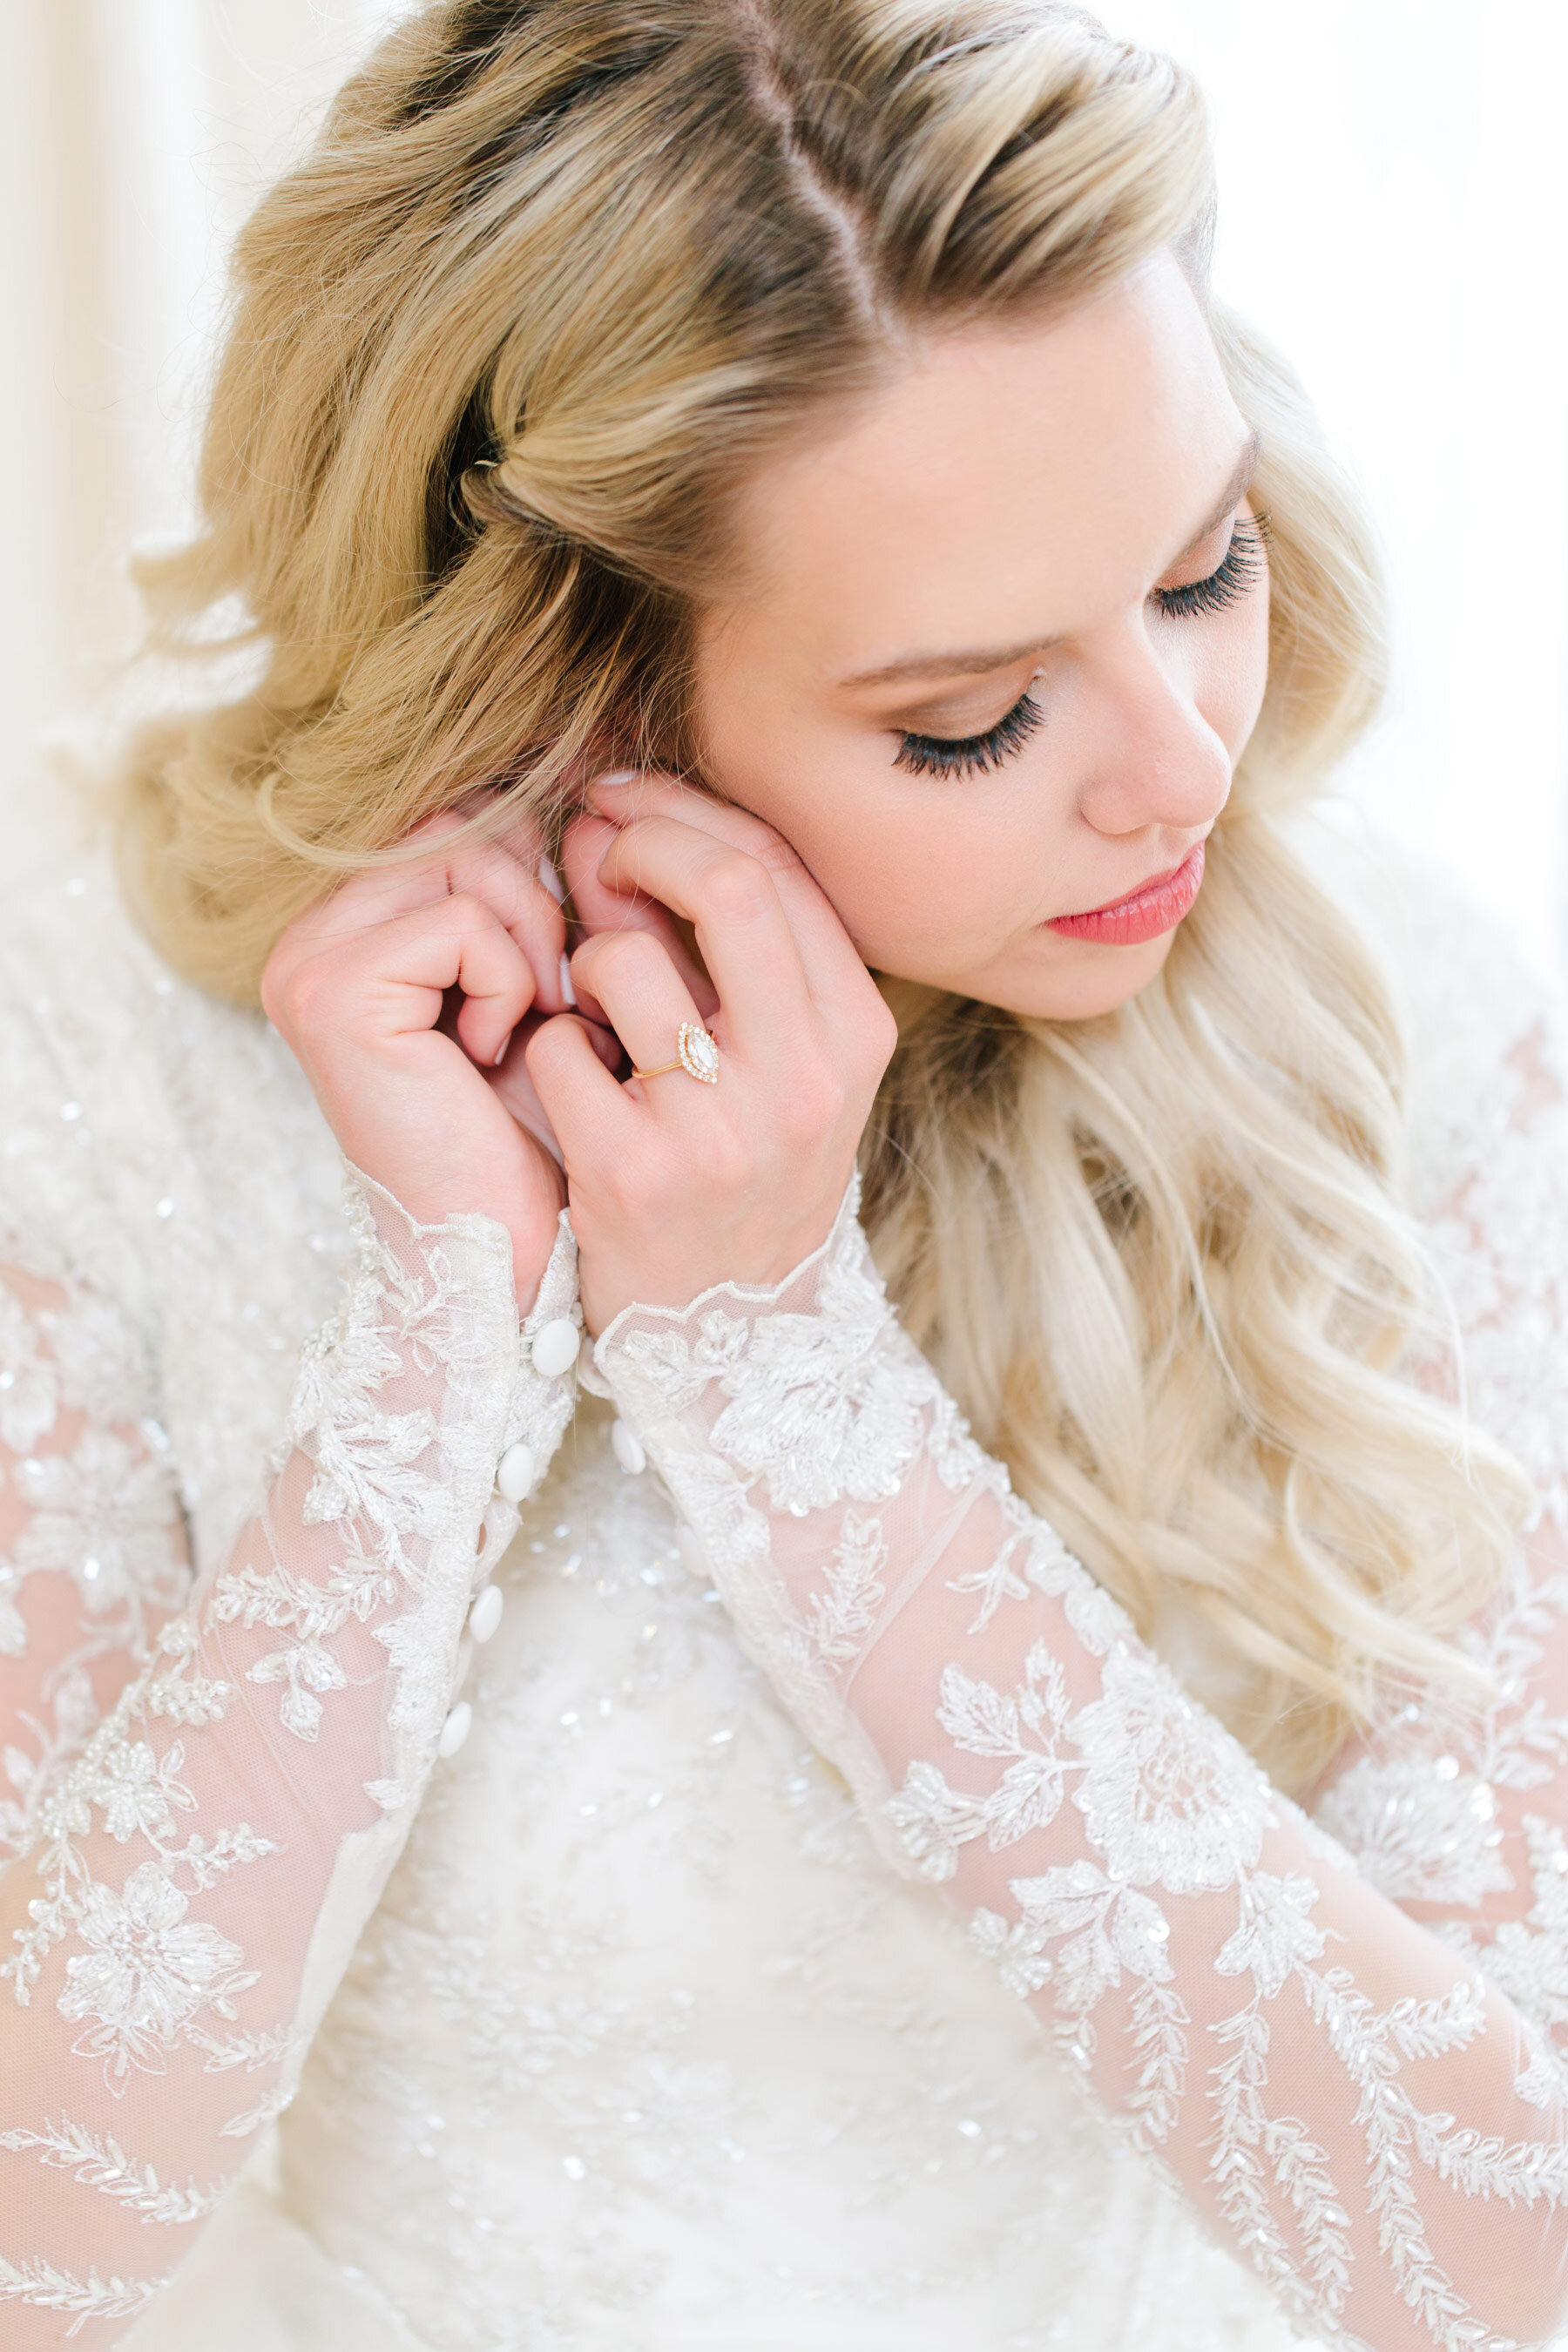  On this bride's wedding morning, Utah County wedding photographer, Clarity Lane captures up-close details of this bride putting in earrings. brides earrings long translucent lace wedding sleeve long blonde loose curled wedding hair women's false wed